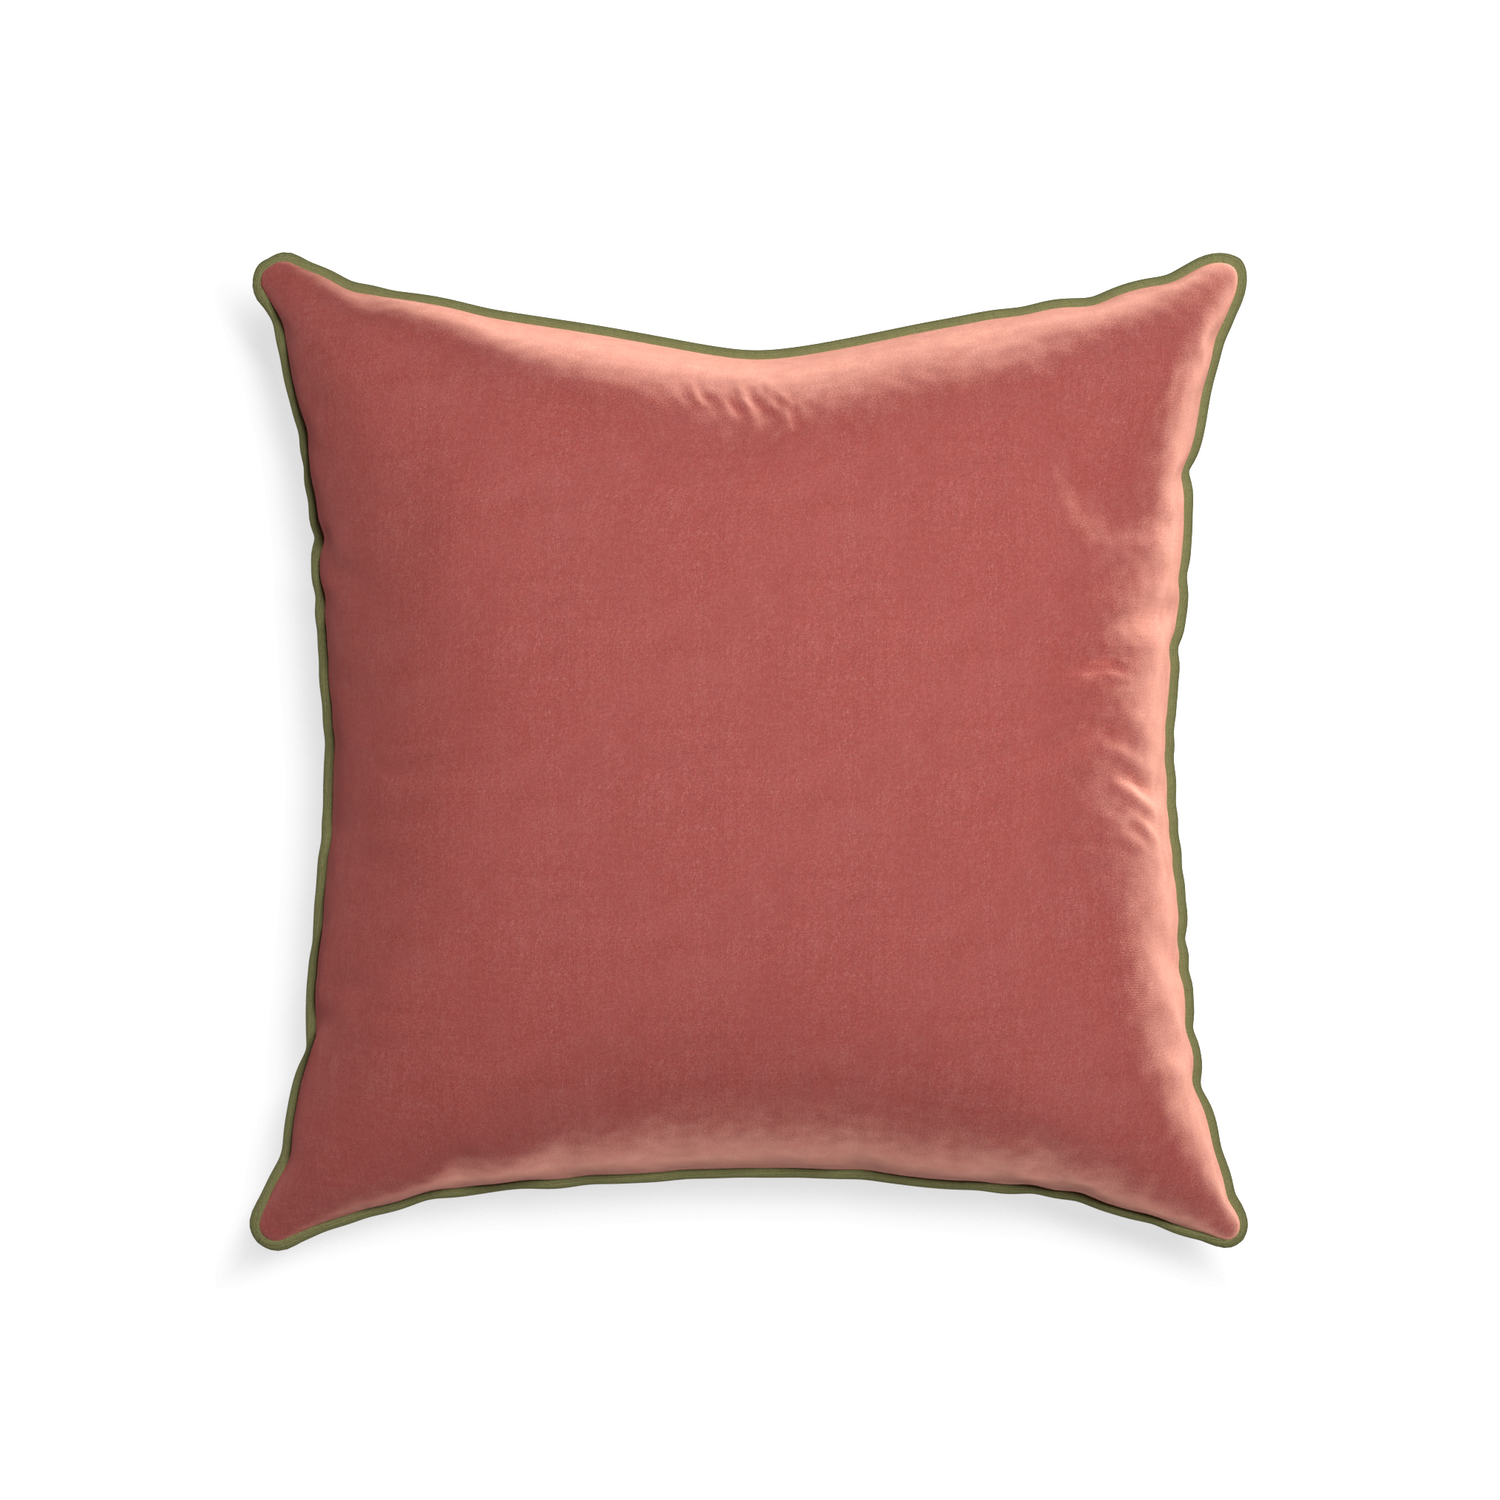 22-square cosmo velvet custom pillow with moss piping on white background